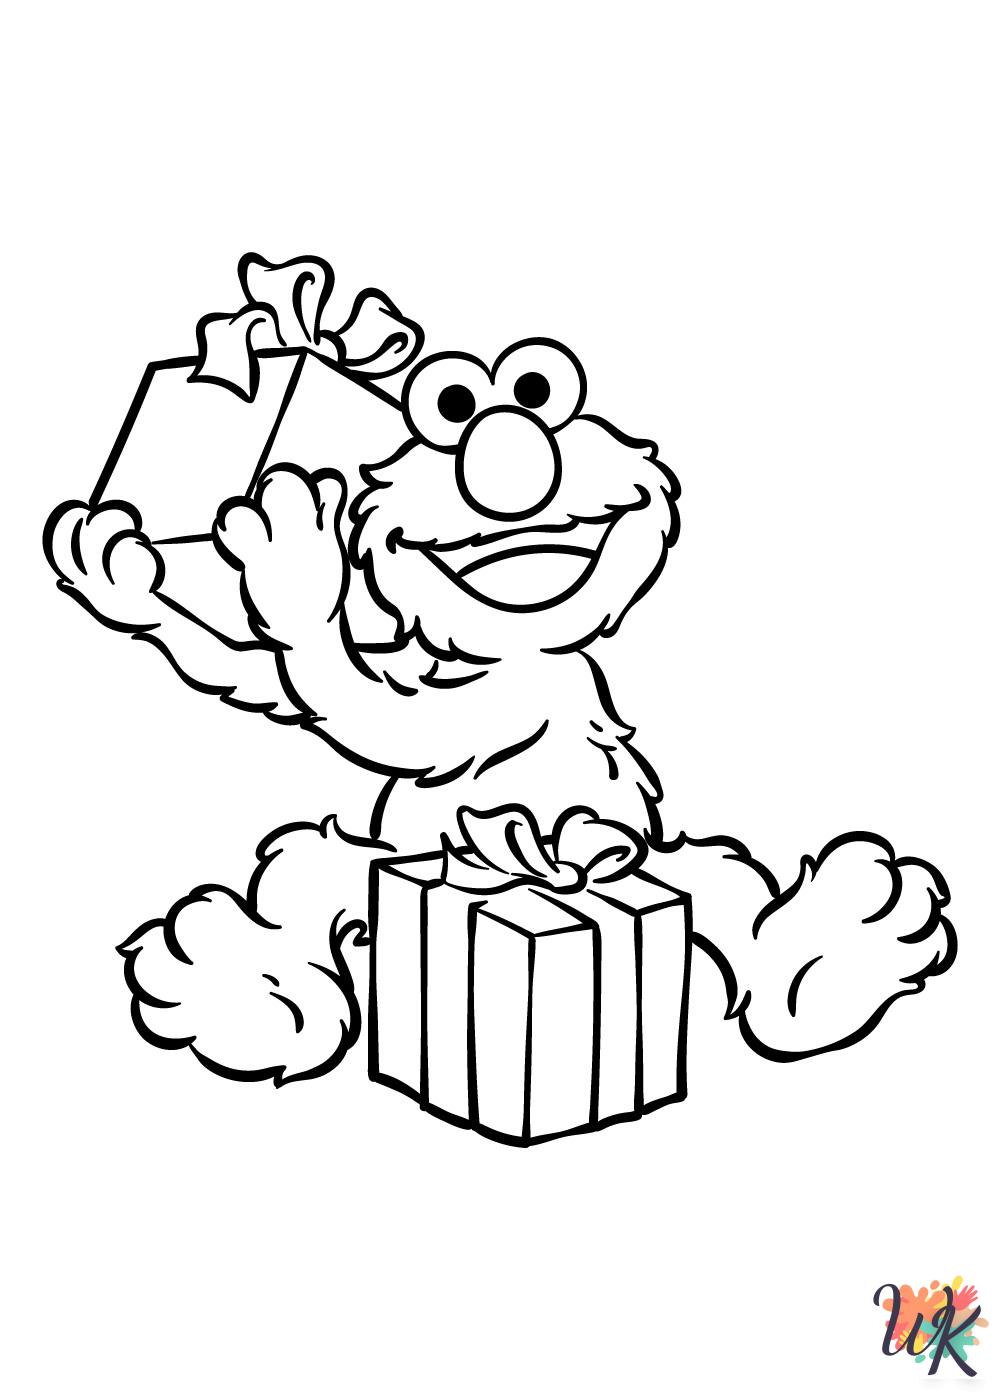 free Elmo coloring pages for adults